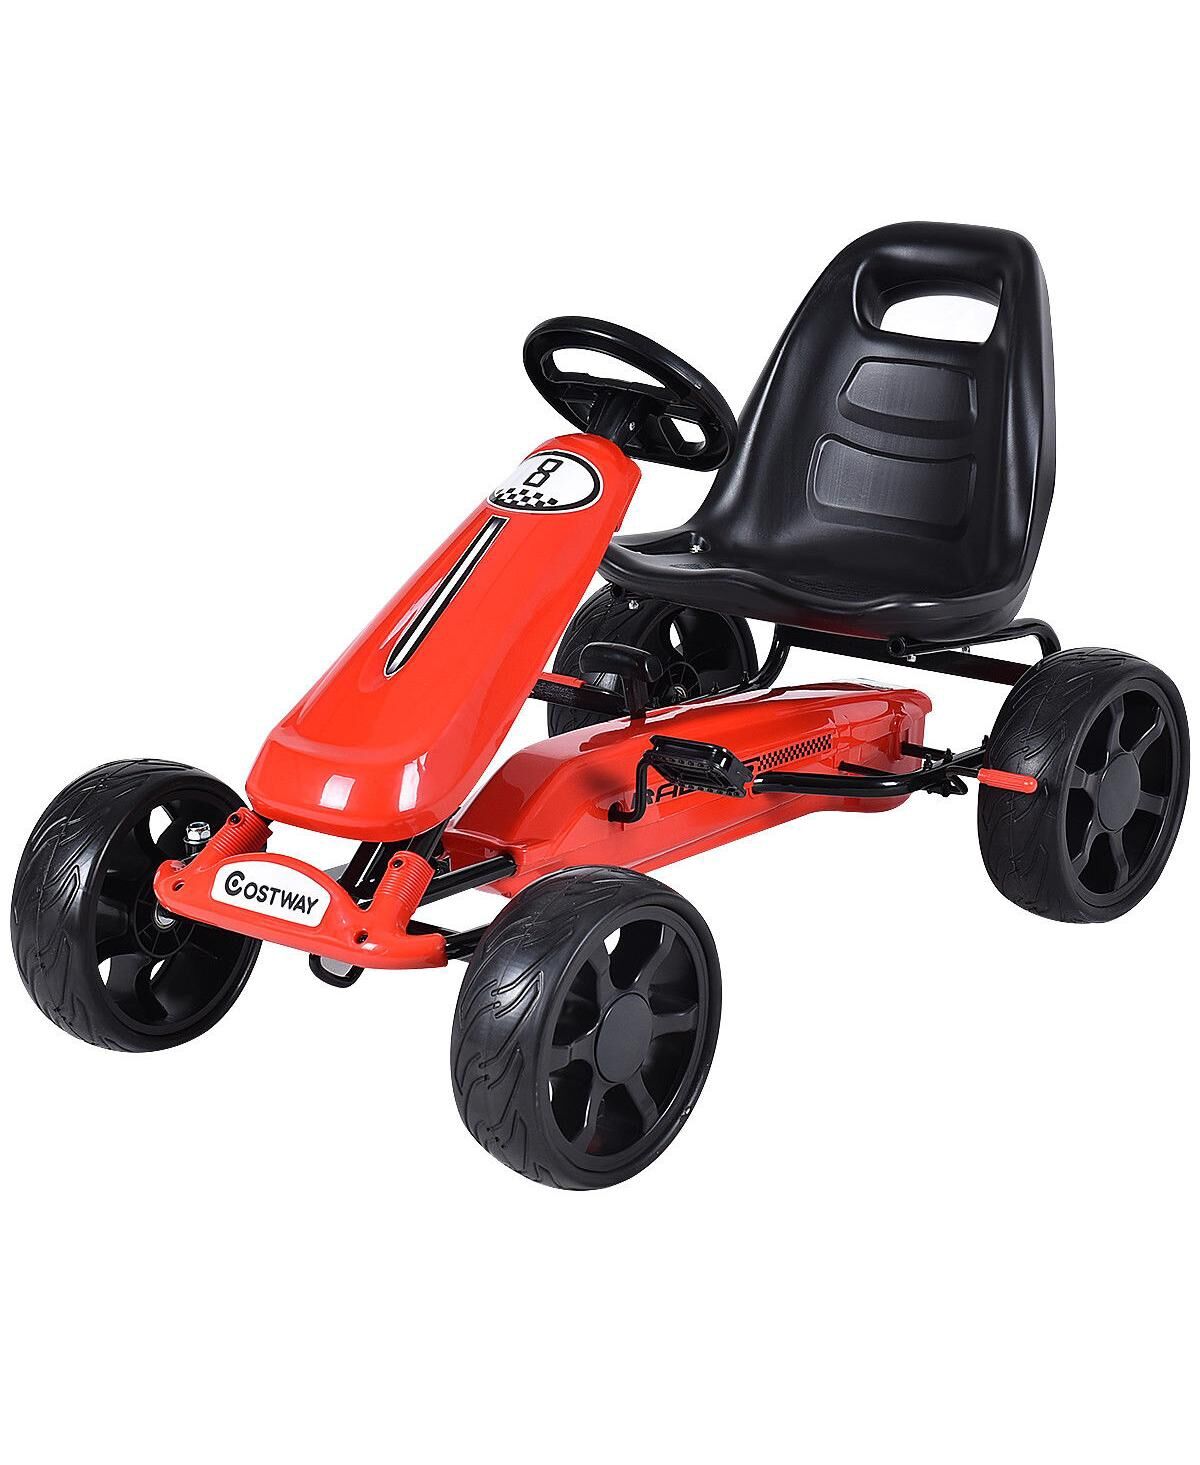 Costway Xmas Gift Go Kart Kids Ride On Car Pedal Powered Car 4 Wheel Racer Toy Stealth Outdoor - Red